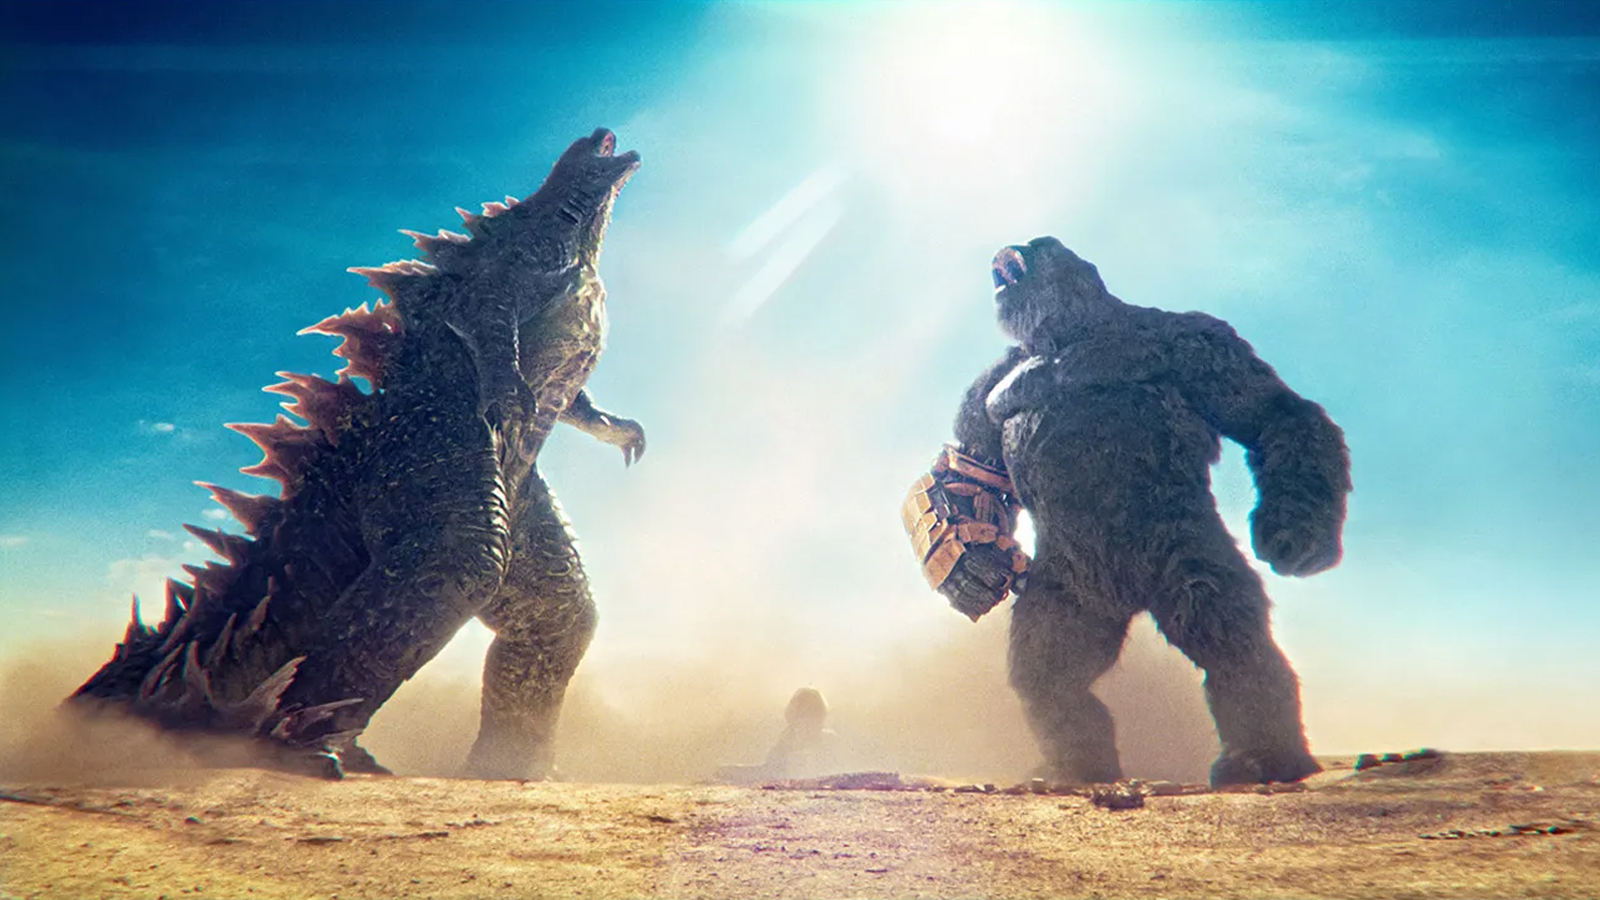 ‘Godzilla x Kong: The New Empire’: Adam Wingard Movie Becomes Highest Grossing In Legendary Monsterverse With $570M WW Box Office